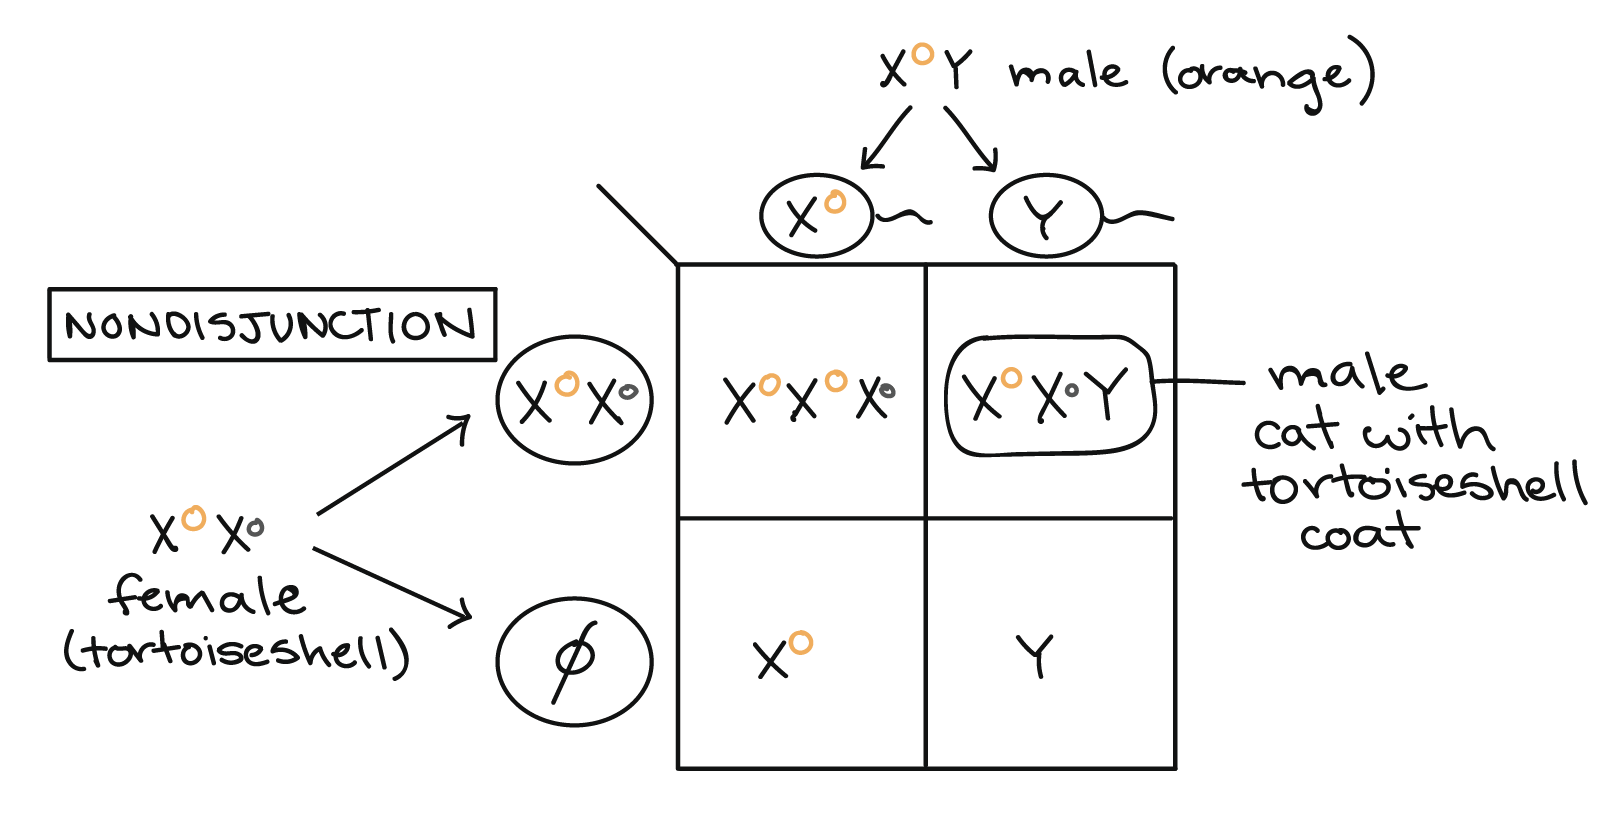 Punnett square showing an example of a nondisjunction event that could lead to production of a tortoiseshell male cat. In this example, an $\text X^O\text Y$ male (orange) is crossed with an $\text X^O\text X^o$ female (tortoiseshell). Nondisjunction occurs during gamete production in the female, resulting in the production of two gametes: an $\text X^O\text X^o$ gamete and an "empty" gamete (one that does not contain any sex chromosome).|| $\text X^O$|$\text Y$-|-|-|-|-$\text X^O\text X^o$ ||$\text X^O\text X^O\text X^o$|$\text X^O\text X^o\text Y$$\text O$||$\text X^O$|$\text Y$The $\text X^O\text X^o\text Y$ genotype corresponds to a tortoiseshell male cat.